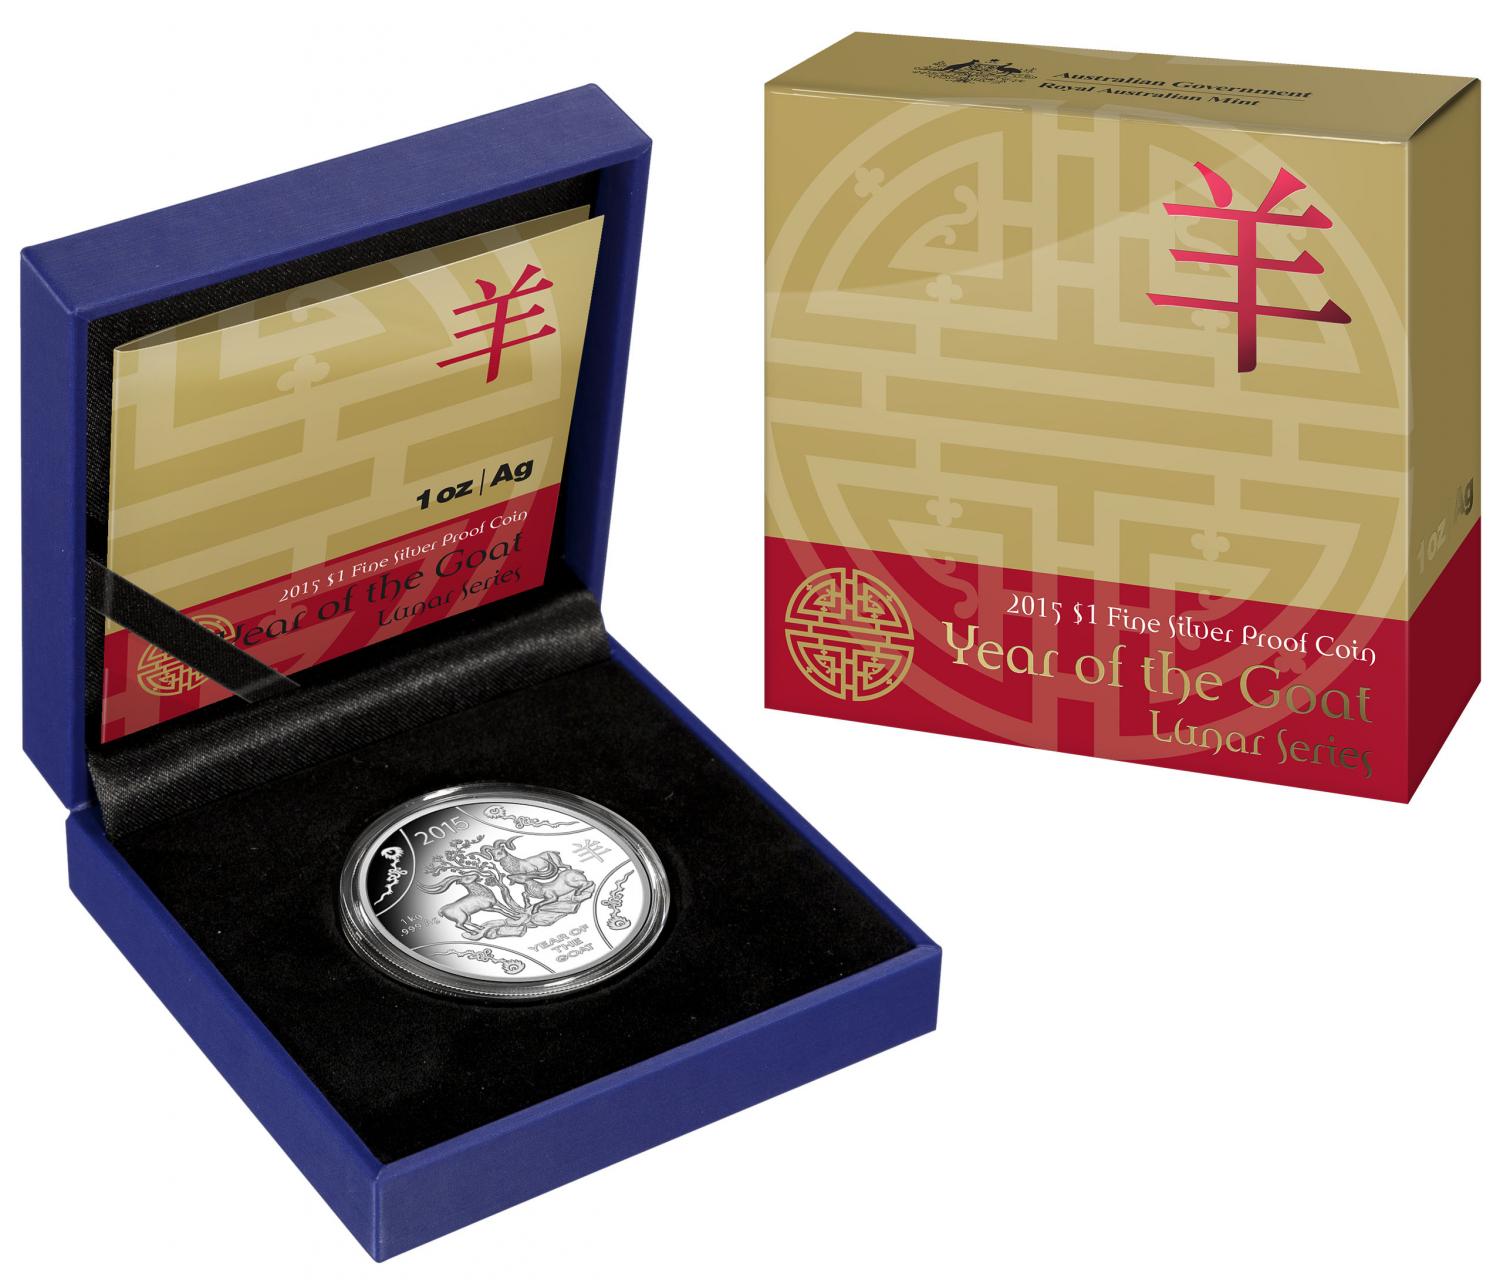 Thumbnail for 2015 Lunar Series - 1oz Year of the Goat $1 Silver Proof Coin